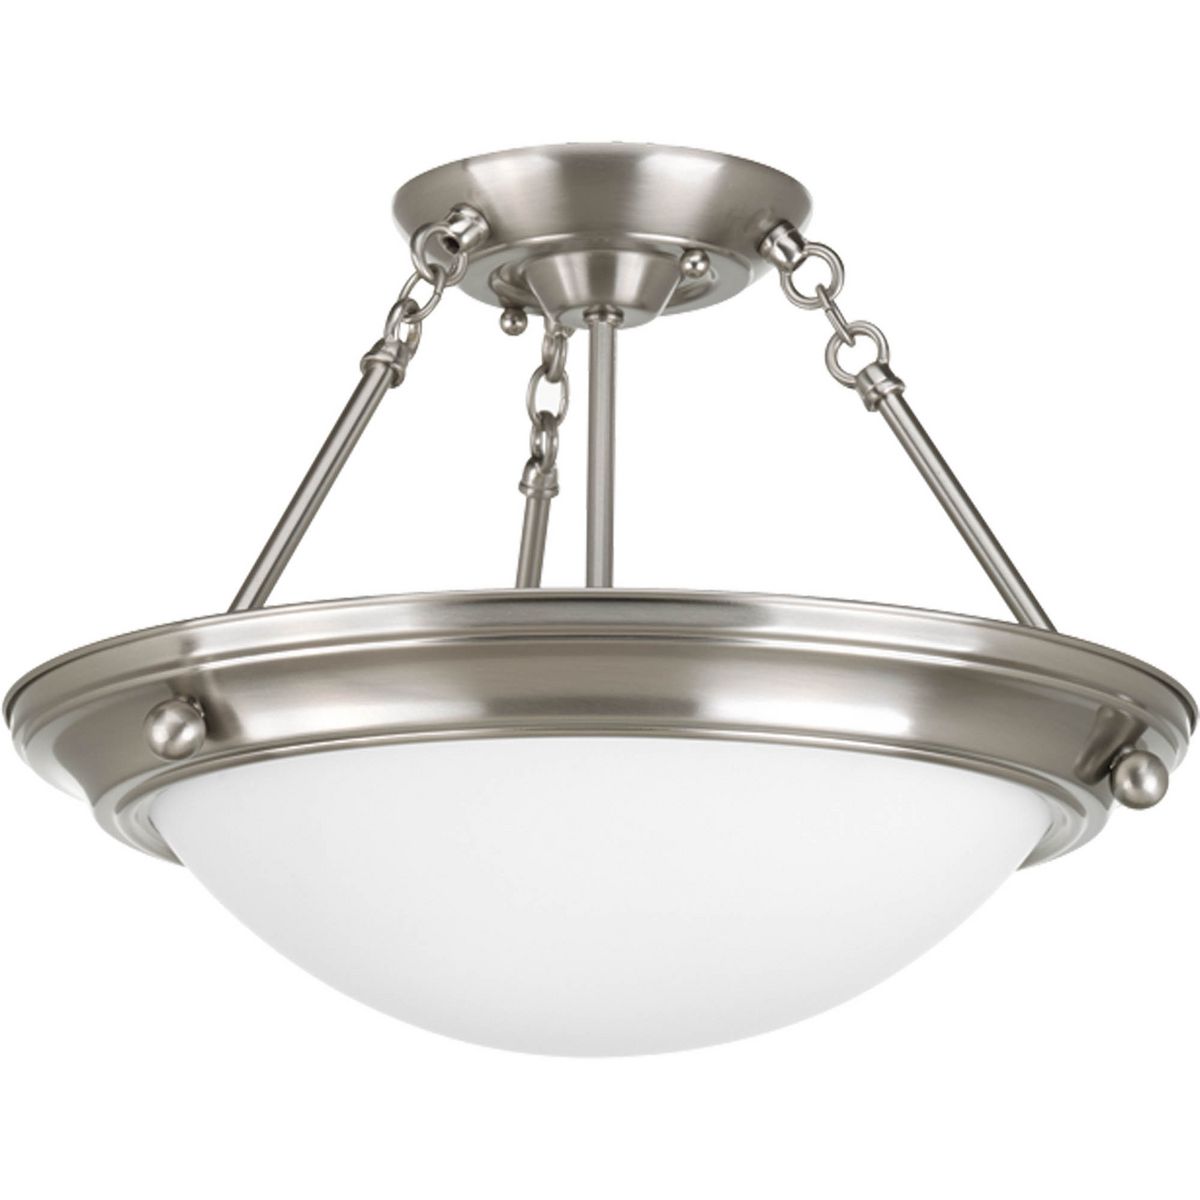 PROGRESS LIGHTING P3567-09 Brushed Nickel Eclipse Collection Two-Light 15-1/4" Close-to-Ceiling